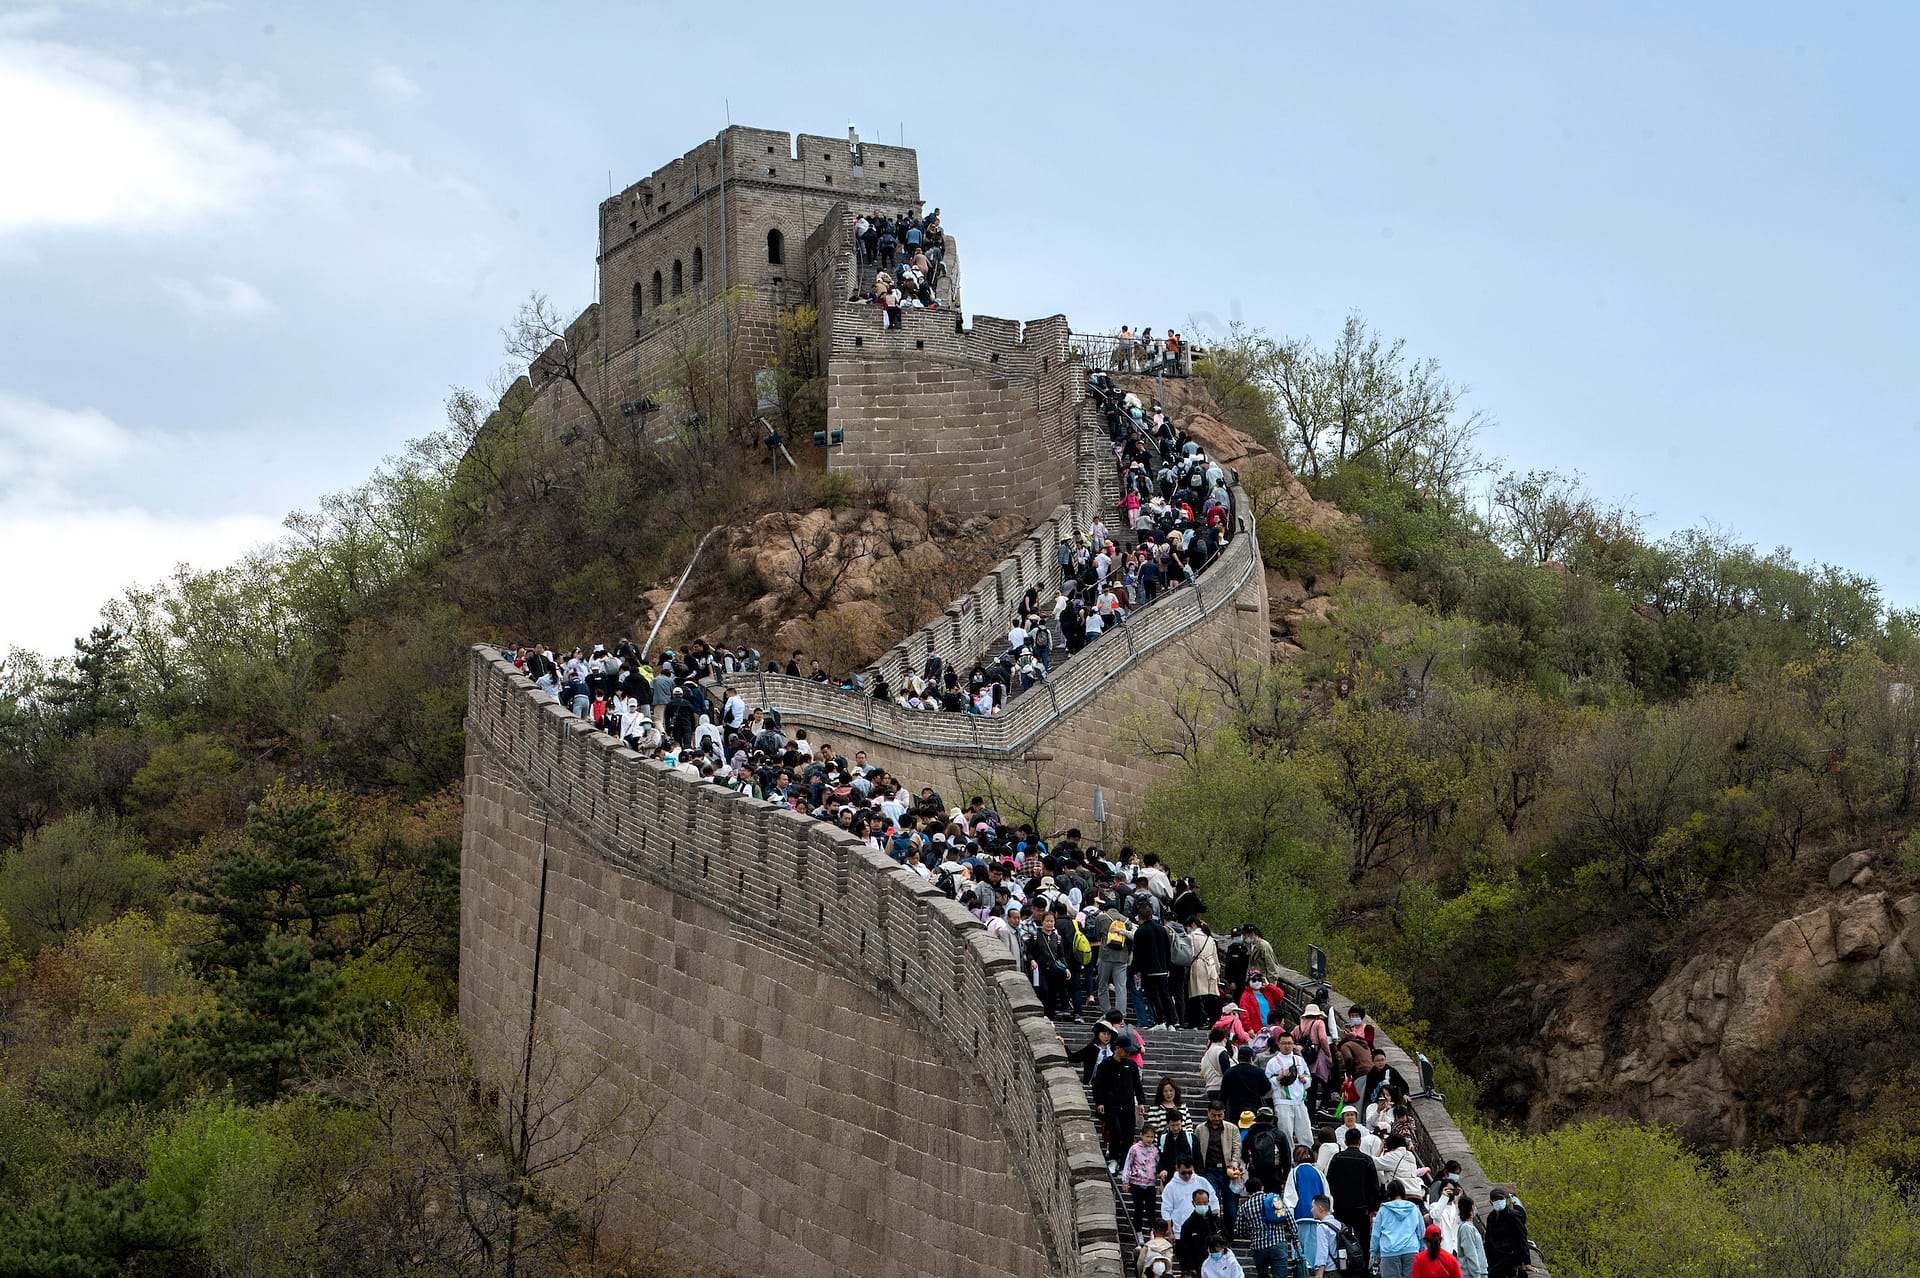 Workers Detained for Digging a Hole in China’s Great Wall